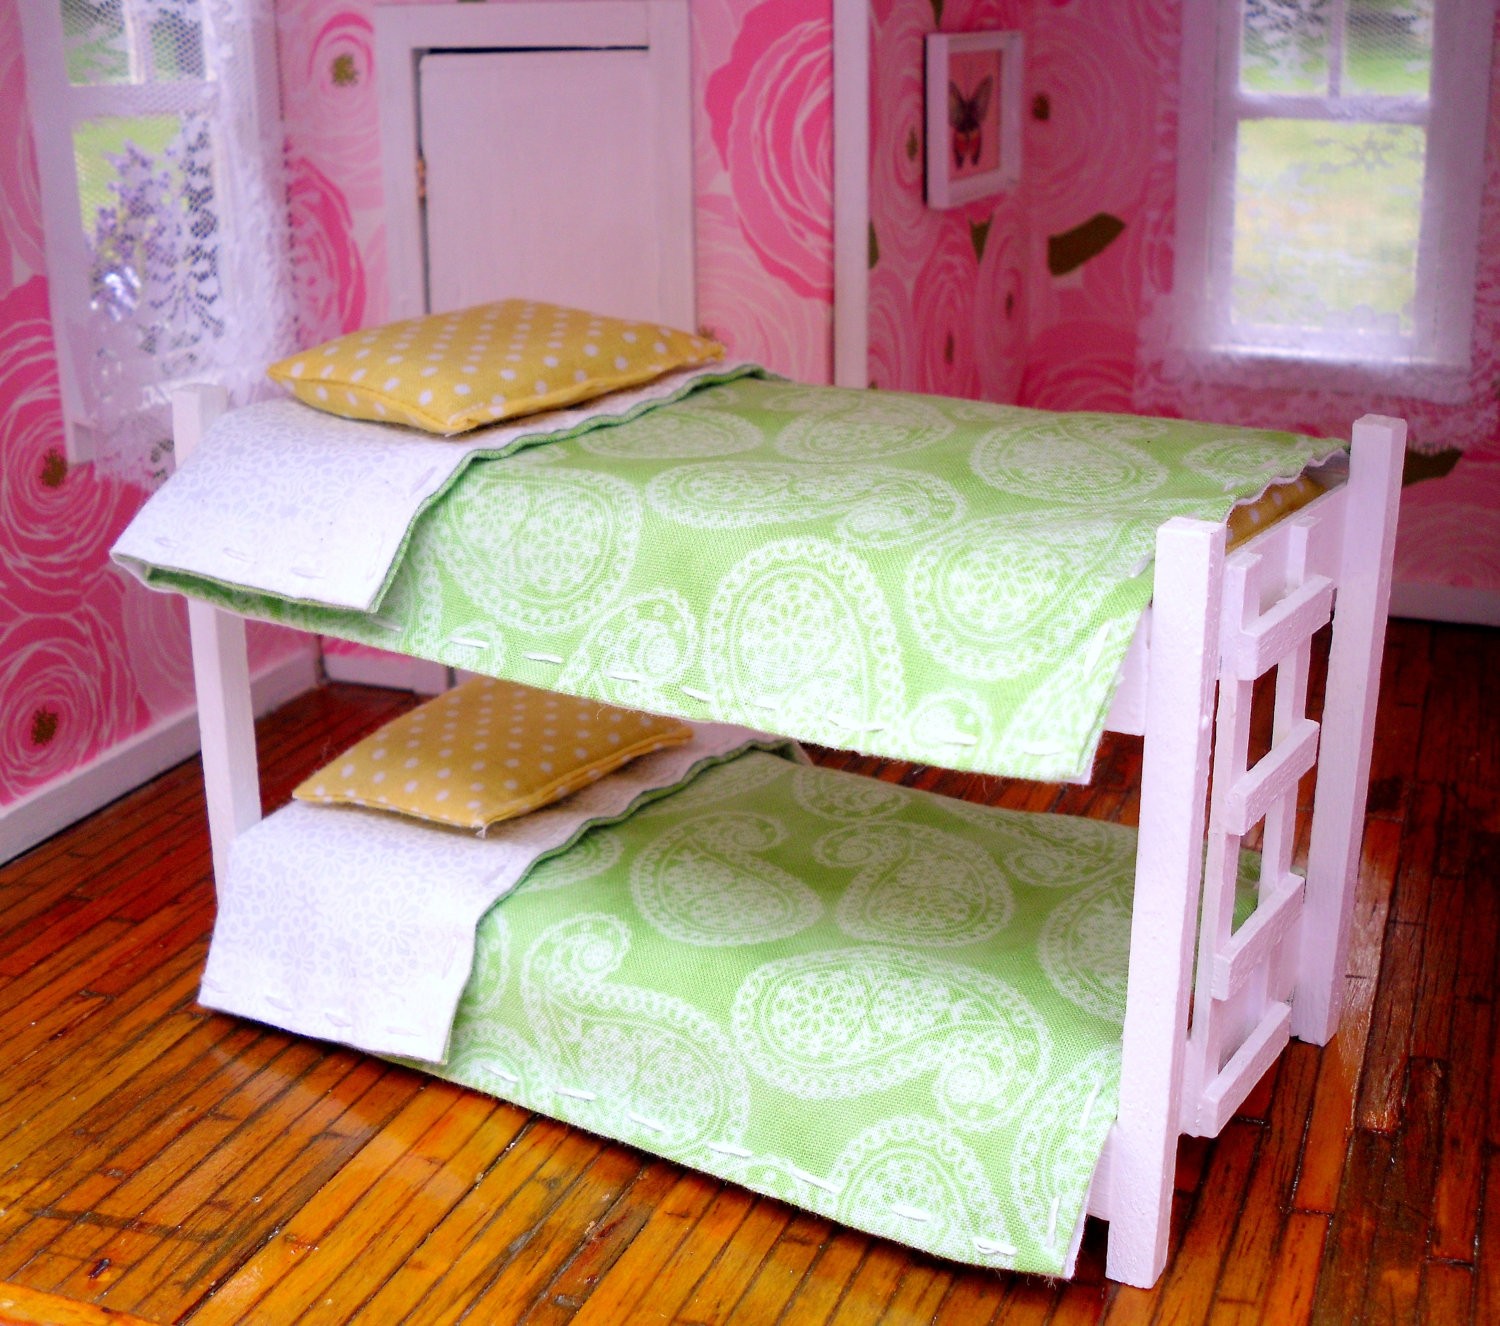 Miniature dollhouse childrens bunk bed with by bnminiatures